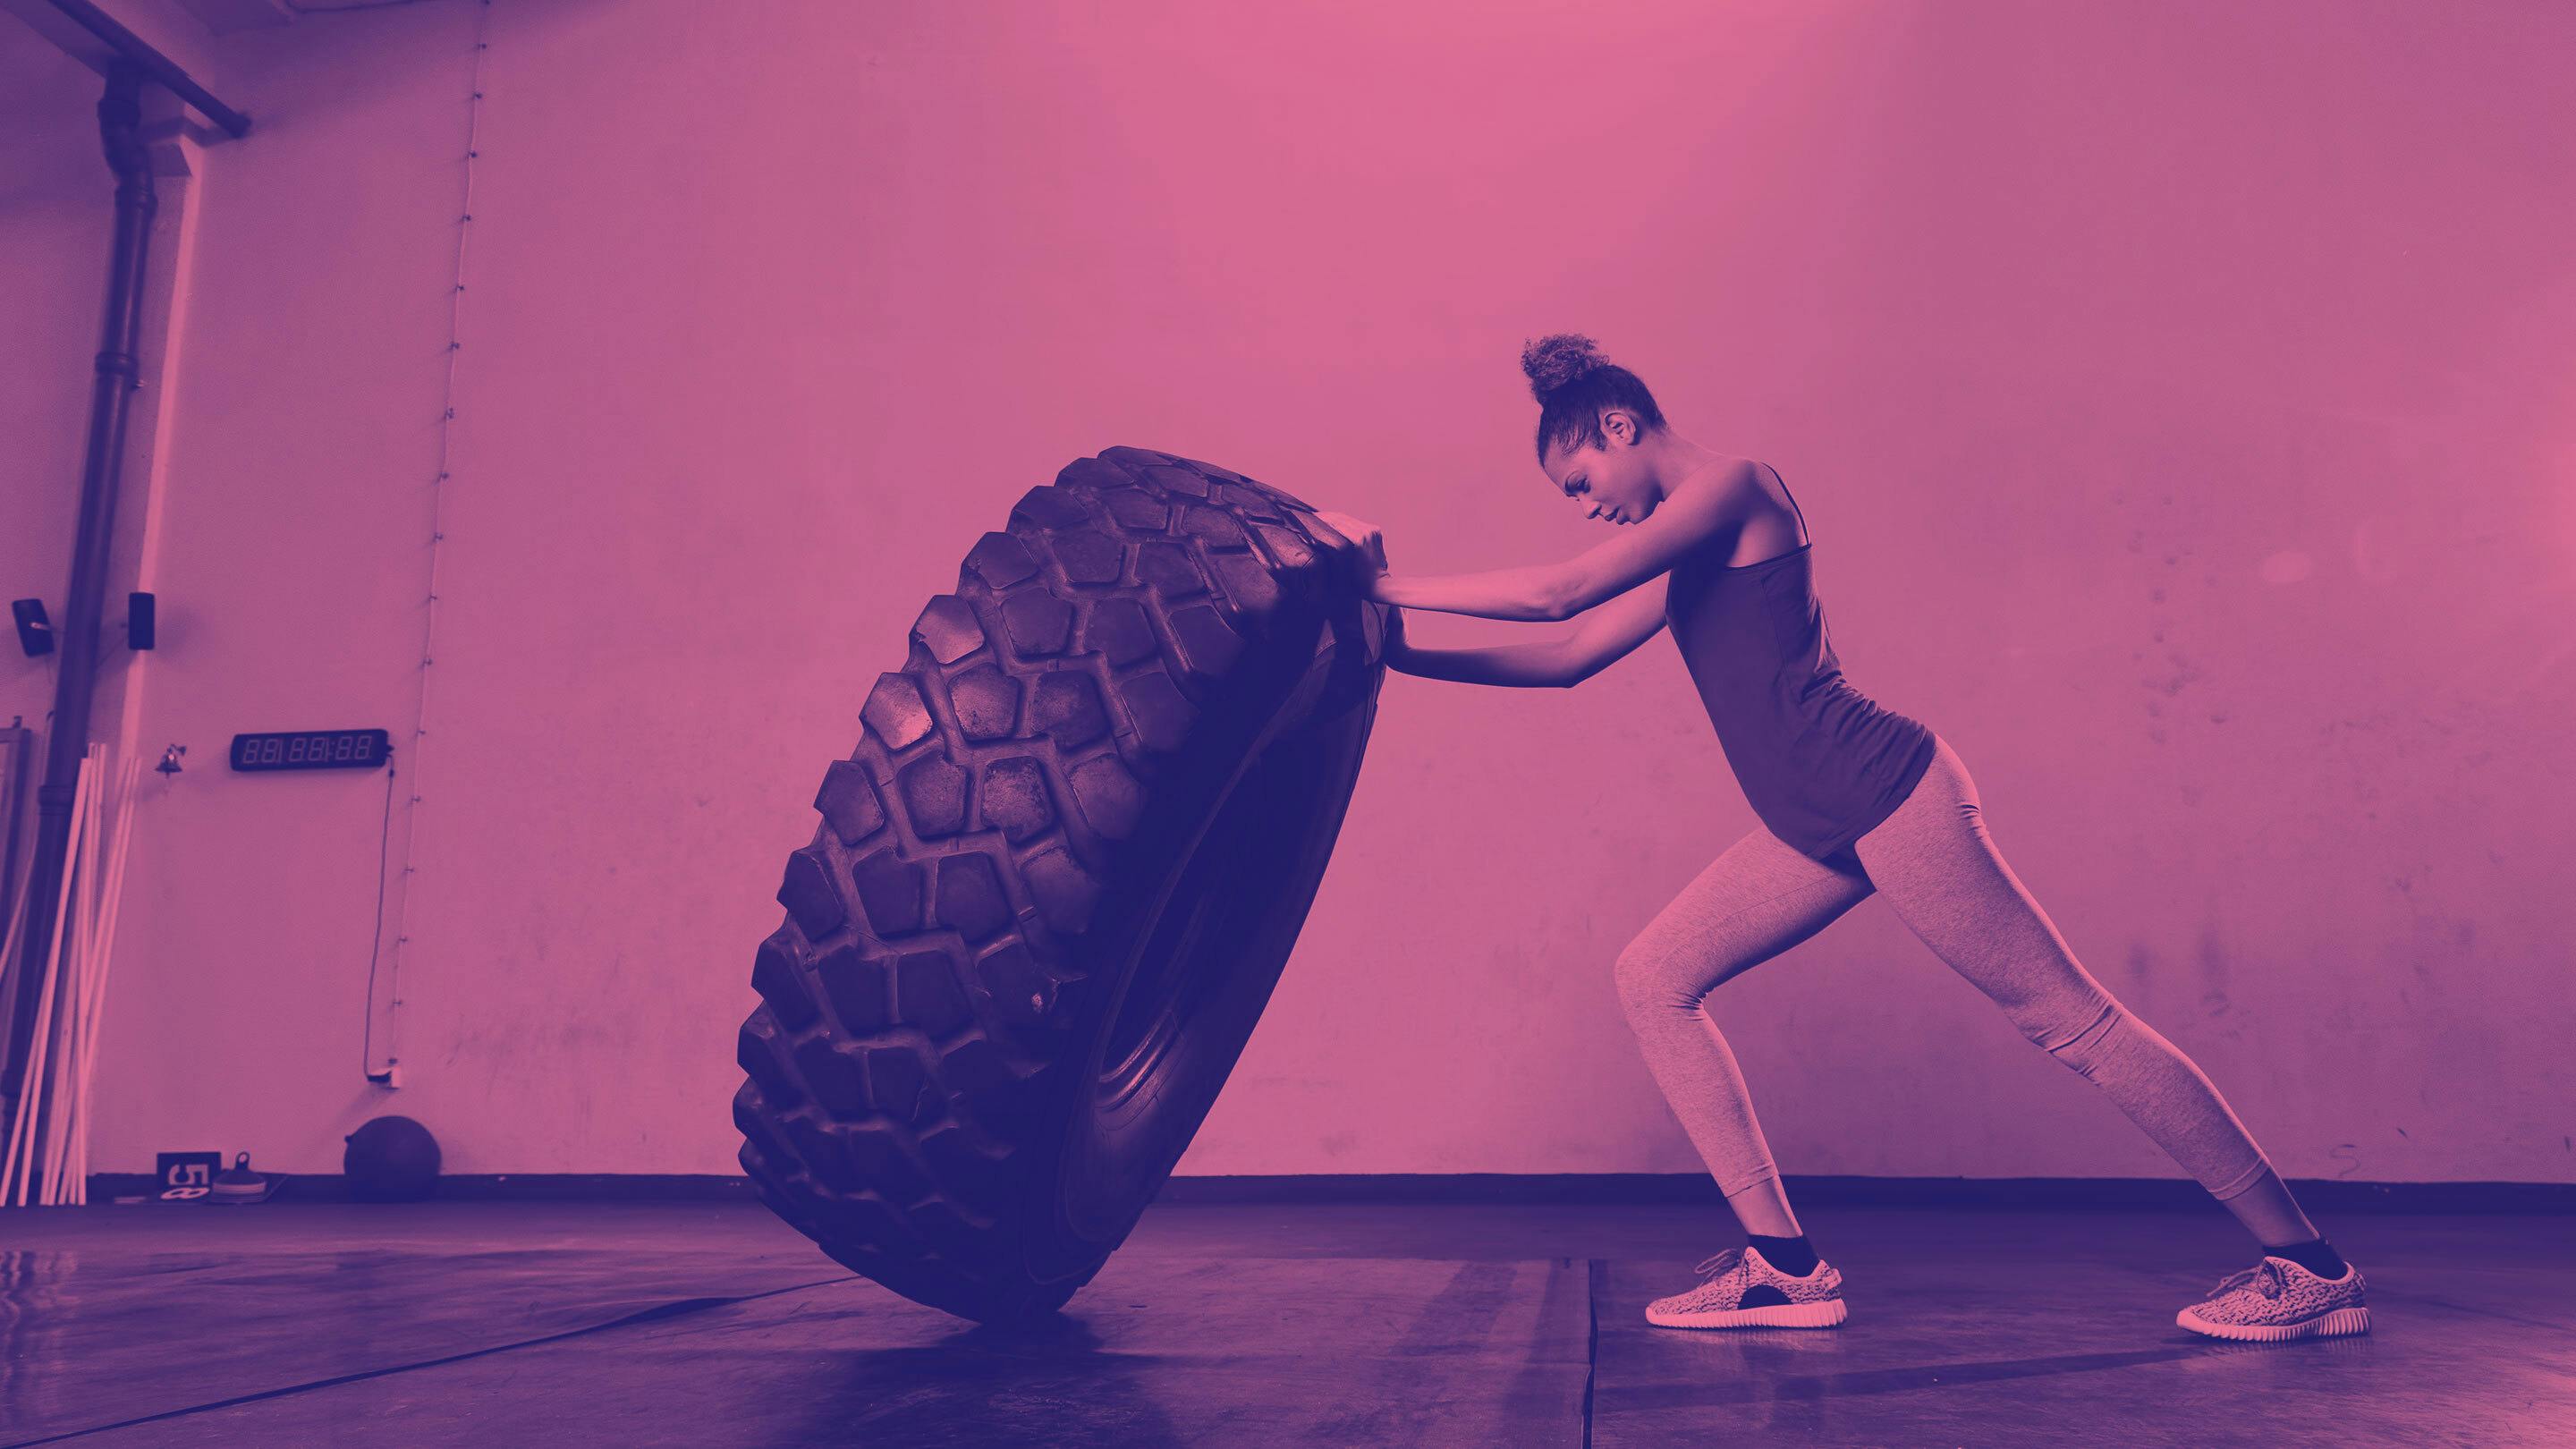 Woman in athletic gear pushing large tire over in gym